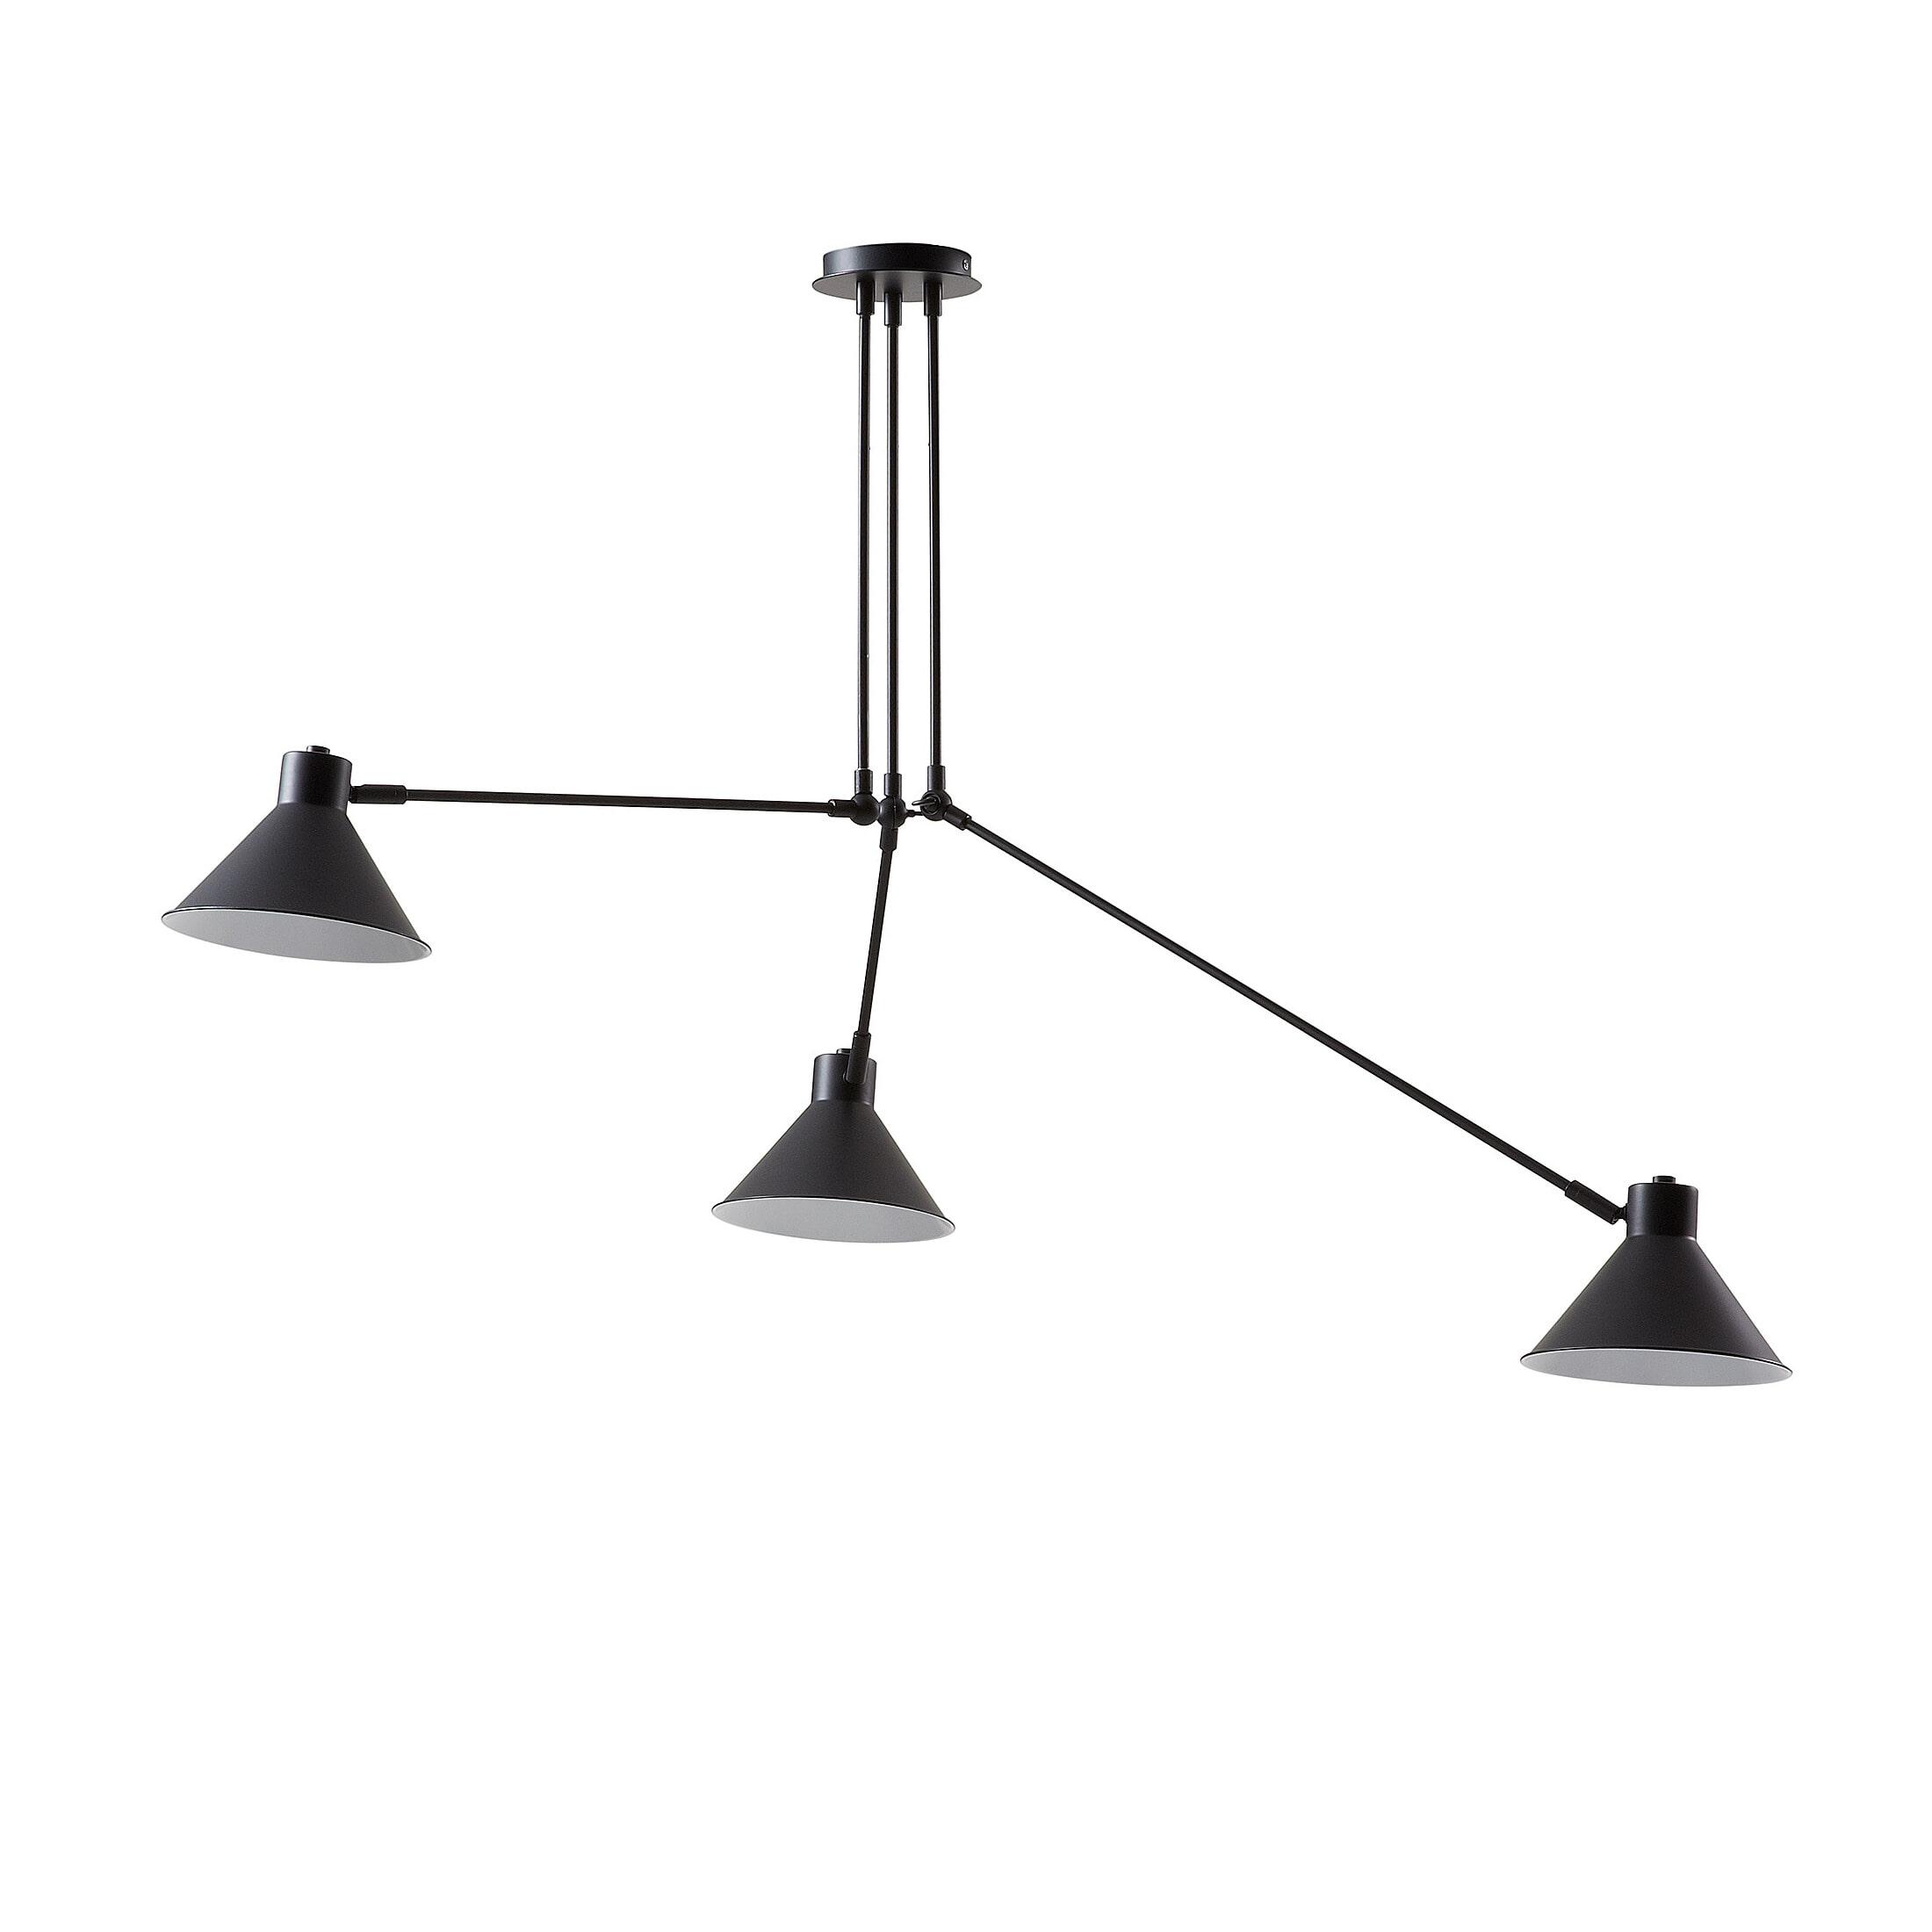 Kave Home Hanglamp Dione 3-lamps - zwart